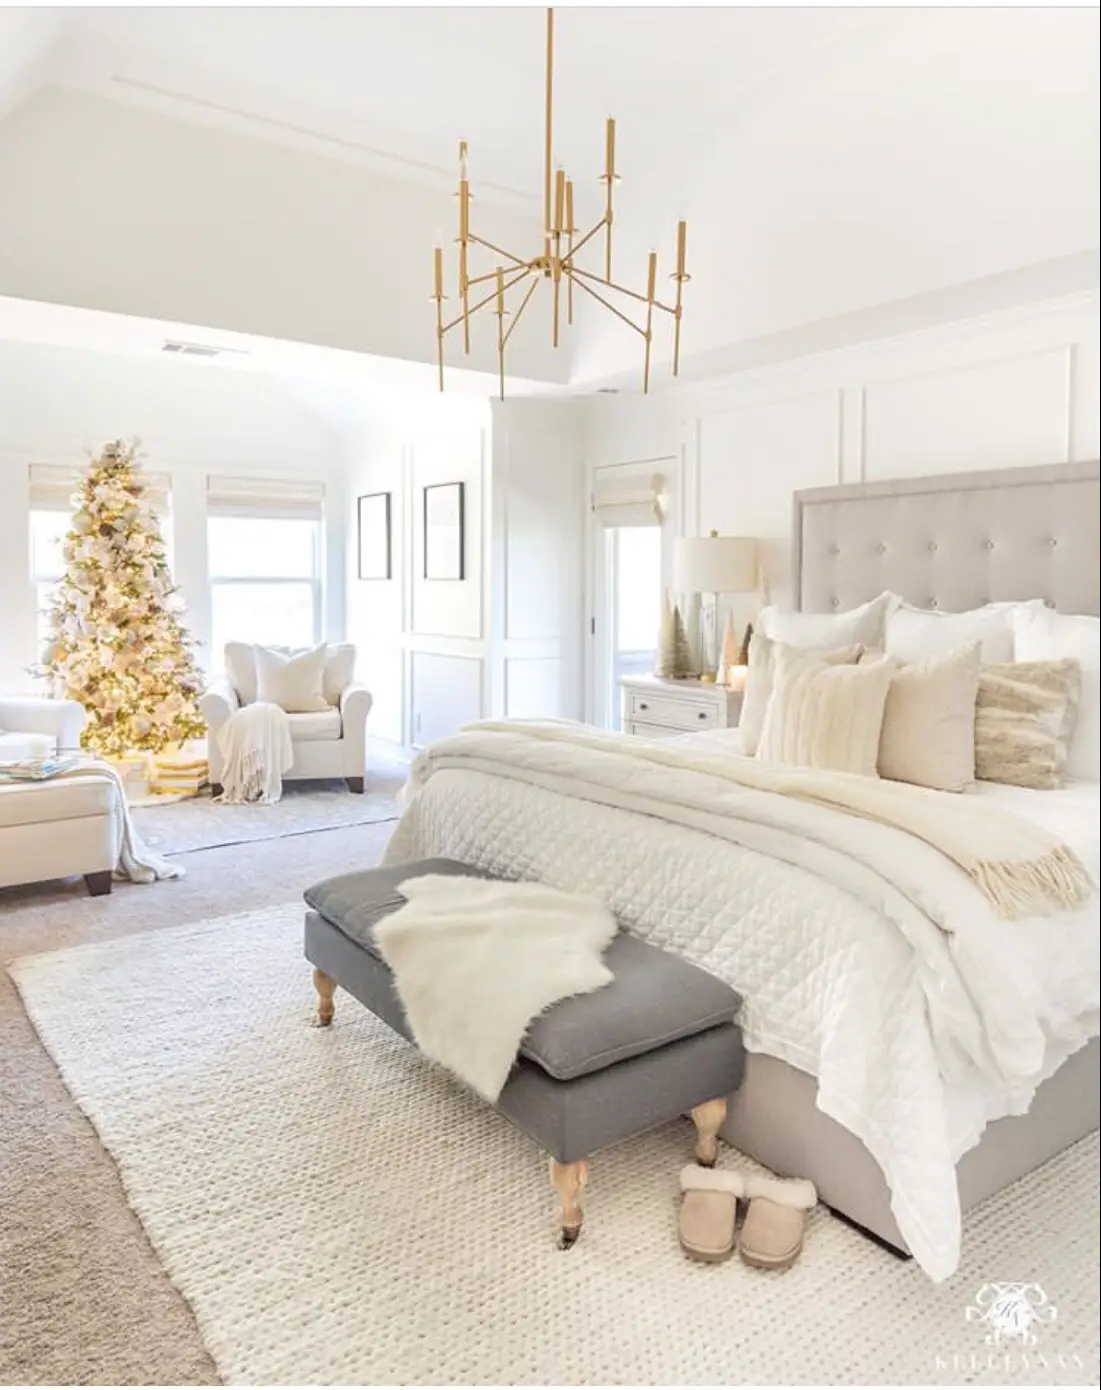 24 Stunning Bedroom Decorations For Christmas - The Wonder Cottage